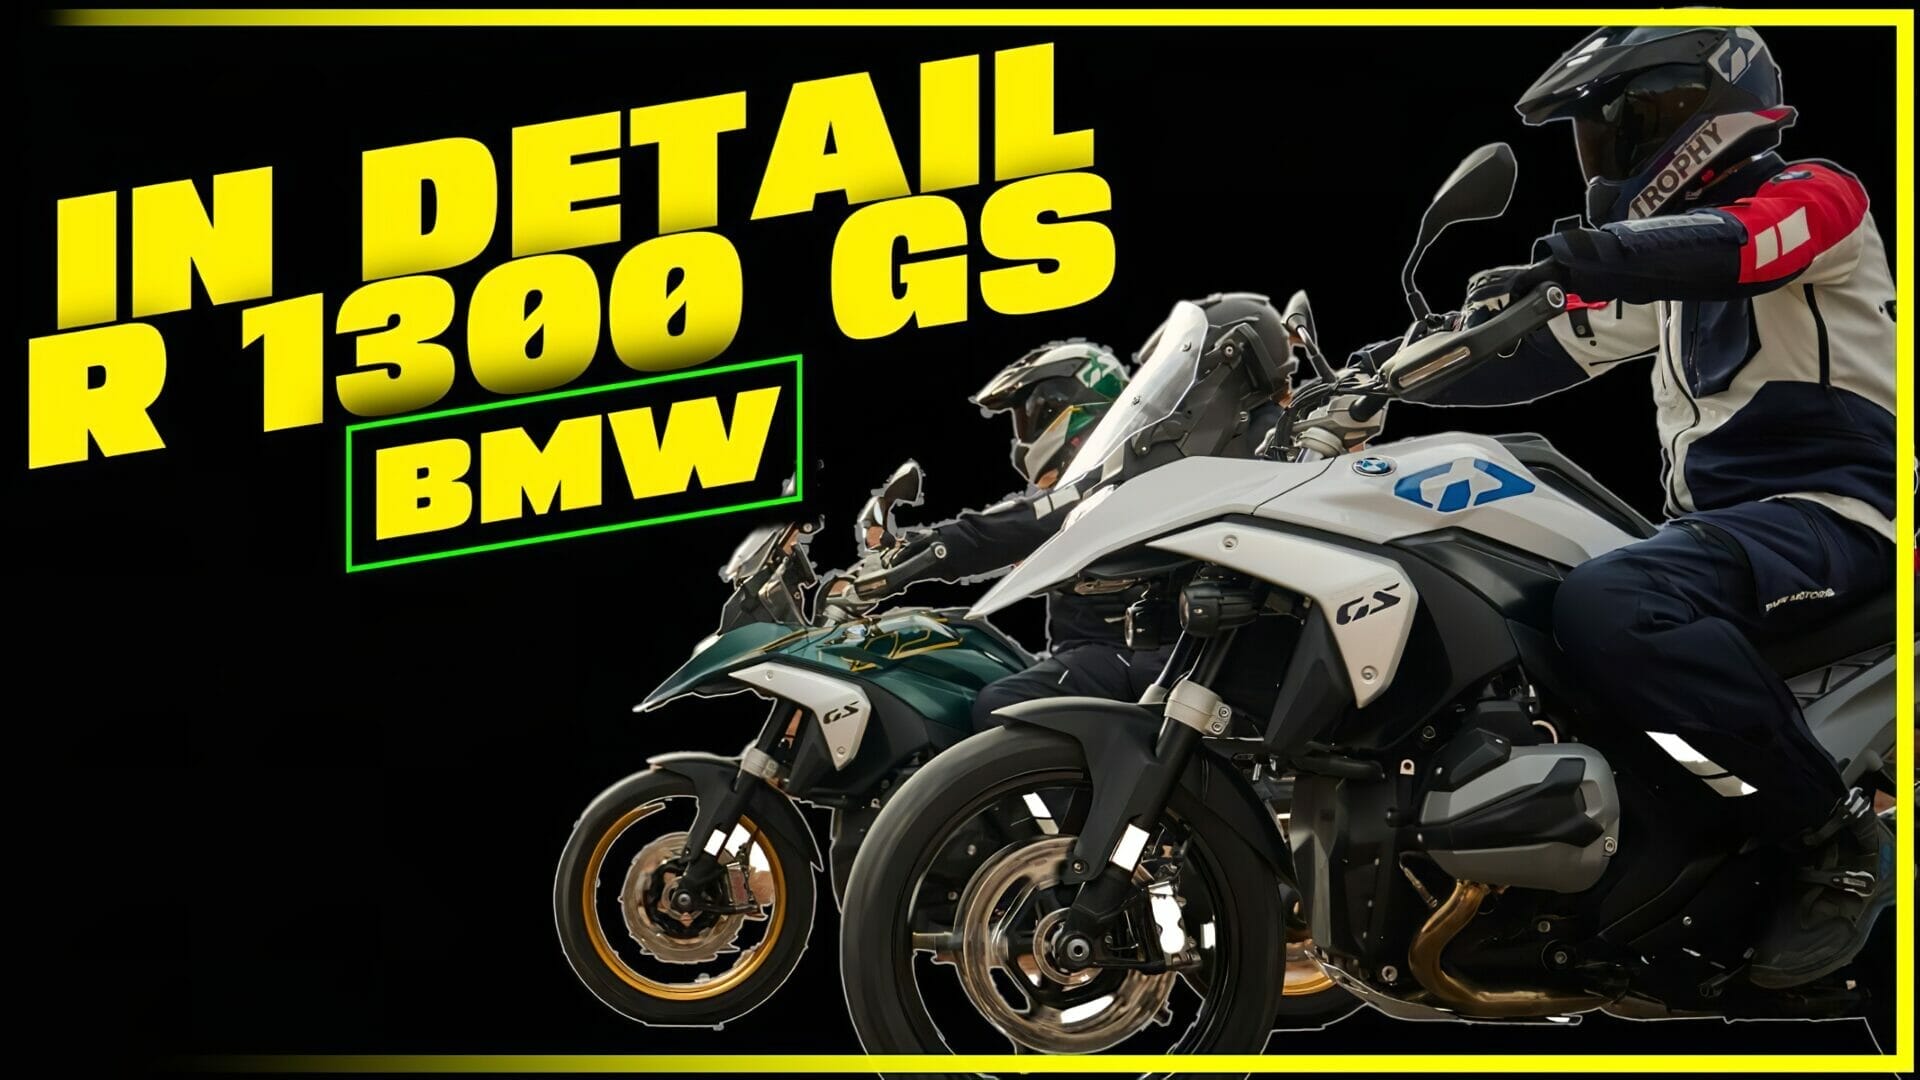 Presentation of the BMW R 1300 GS - Technological masterpiece? -   - Motorcycle-Magazine